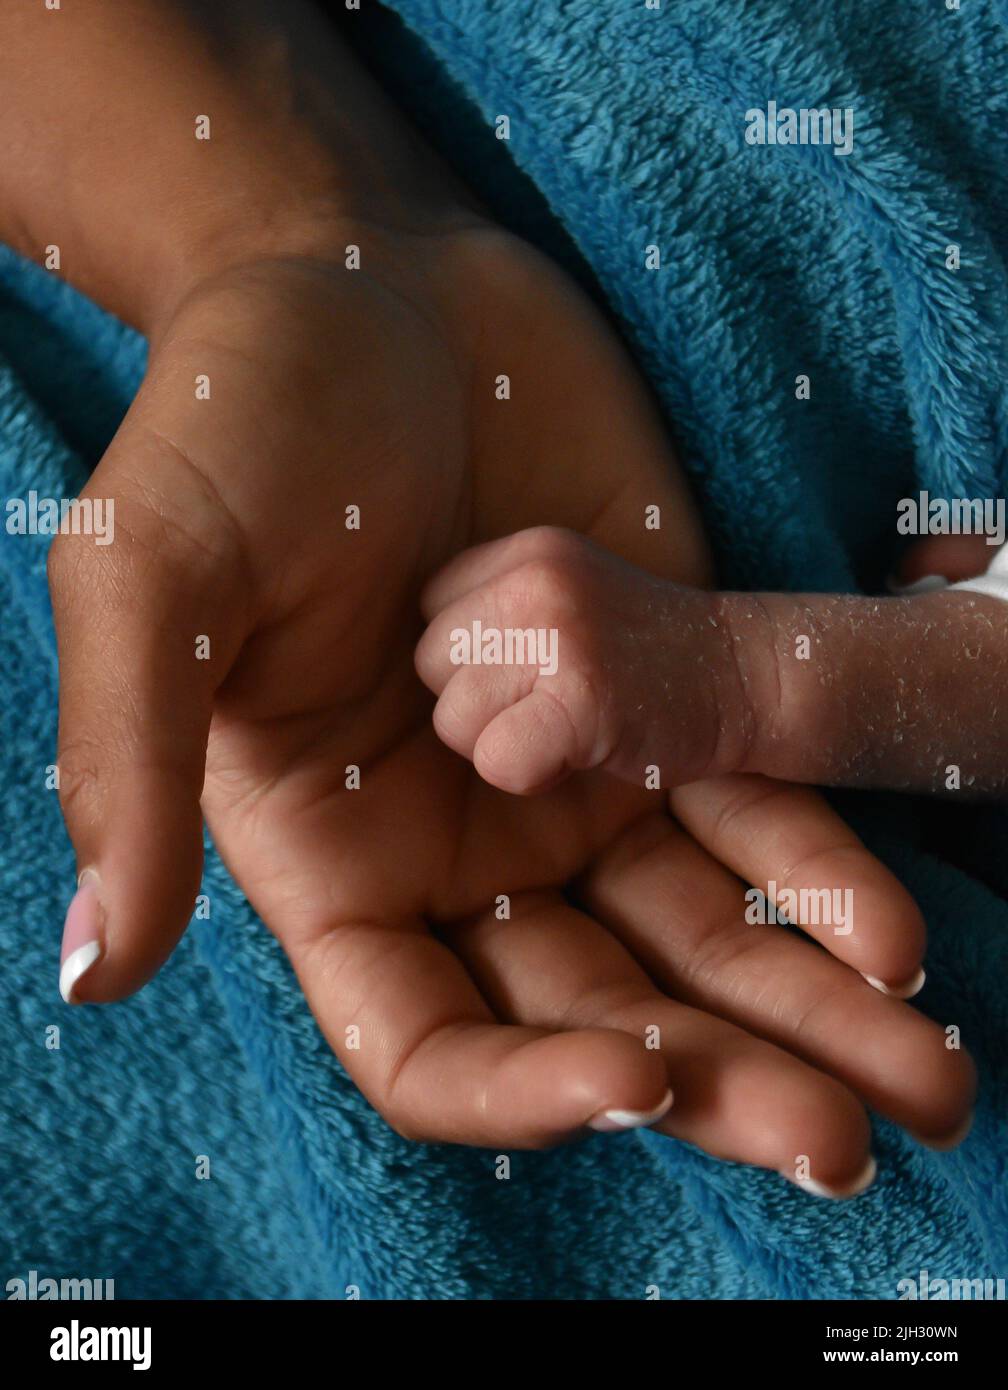 Mother holding newborn baby's hand Banque D'Images